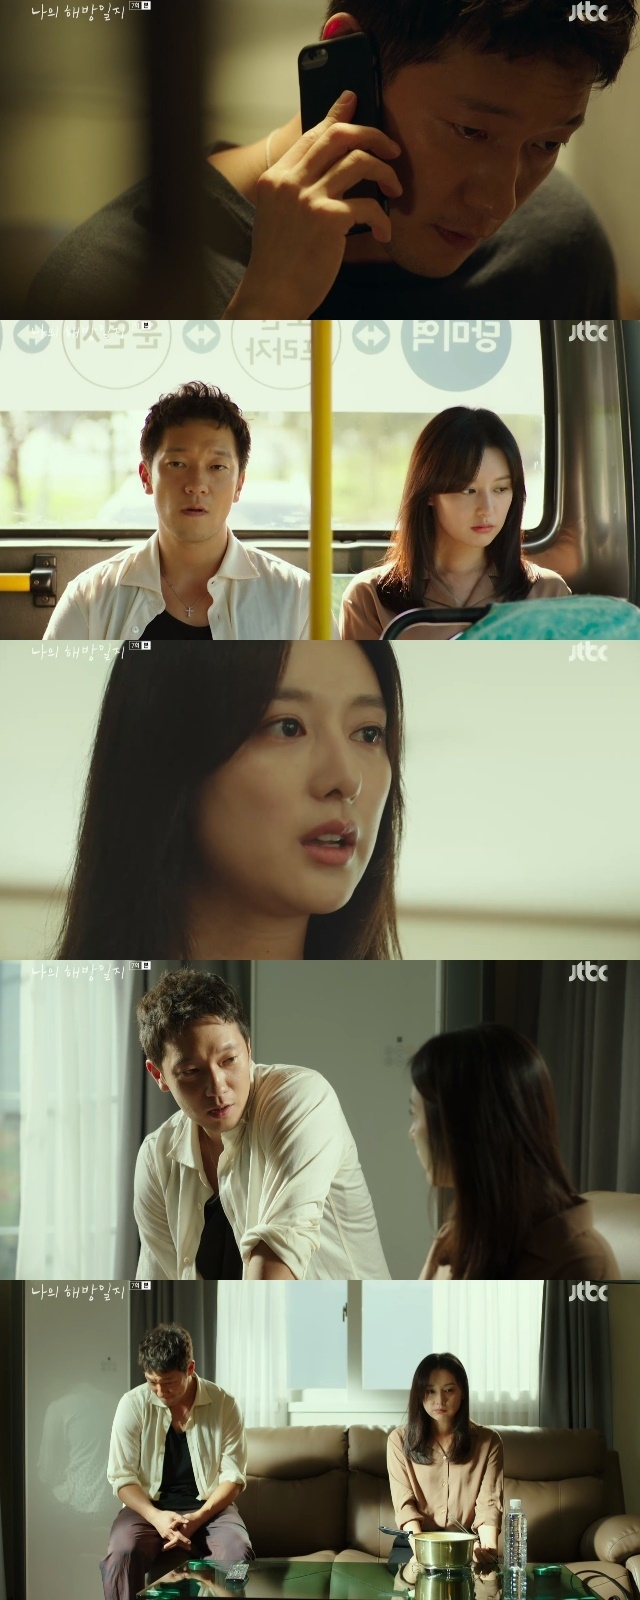 While Son Seokgu genuinely confessed his mind toward Kim Ji-won, clues that led him to estimate his past were revealed and focused attention.In the seventh episode of the JTBC Saturday drama My Liberation Diary (playplayed by Park Hae-young and directed by Kim Seok-yoon), which was broadcast on April 30, a figure of Ami (Kim Ji-won), who suffers from the debt problem left by her ex-boyfriend, and Koo (Son Seokgu), who watches her silently.On the same day, the debt issue that his ex-boyfriend passed away came to him. He learned about the transfer of his address during the process of his fathers issuance of a copy.She turned off the emergency fire for a friend s excuse to the reason, and wrote to her ex - boyfriend, I just know that I borrowed it from my house.After trying to contact him for a while, he was connected to his ex-boyfriend, but the reality was bitter.My ex-boyfriend is a credit delinquent right now, and I can not go to the company. I told Ami to pay the money. You have that much money in your house.I do not pay you back, but I want you to solve the urgent thing. I will pay you back later. I do not have a penny right now. The ex-boyfriend said, You are the only one who asks me for money. I can not do my job even if I try to pay it.Unless I steal, wheres the money right now. Sleep, eat, eat. You think Im starving to death.I do not have any idea that I have paid back, so do not tell me that I did not pay it. My ex-girlfriend was carrying all this anger and suffering together.In the end, he decided to solve the problem with his own hands, and he paid the loan in full, canceling the deposit, which was due four months later, with the housing subscription account, which was the number one subscription.After that, Yum Ami accidentally met Gu and told him that he had moved his address back home and that he had settled his debts.Just give me a name and contact number. I wont do it. Someone else will do it, he said.Do you still like (ex-boyfriends)? he asked Ami, who was silent and insisted that his ex-boyfriend would pay back the money.Yum Ami was angry. Why do you keep looking at the floor? Should I know that the man who was only on the Internet is a money-raising fool?And then he said, I think its guilty to ask for what I borrowed, and its just my fault that Im involved in this.I dont understand people who force me to tear them out, helping me not understand living with a troubled husband.If you ask for help, then help me. I can not see people who can not see the end. Why do not you die in a hard person with a blush? Youre blushing at me, Gu said. You like me. You cant do anything in front of someone you like.So you can honor this stupid day and make him that kind of person so that he can say everything he wants without blinking.I asked him to admire me so that he could not notice even if he was all over. Gue boiled this ramen silently to this salt Ami, and said, Youre surprised to know what I am. Im a real scary guy.But you make me nervous. Im nervous when you see me. Im annoying. Im annoying. I know. I know.Meanwhile, Gus past was vaguely revealed: Gu received a call from a man before the money issue of Ami was completely resolved. The man said to Gu, Do you chew that your brother is sick?Im not in Seoul. Samsik went to Sanggats house a while ago, and I saw Shim asking you about you. Can I contact you? Old man went to the bathroom.I asked here and there, and it seems that it is outside the eyes of the white sandy beach. If we step here, we go to the white sand goal. 